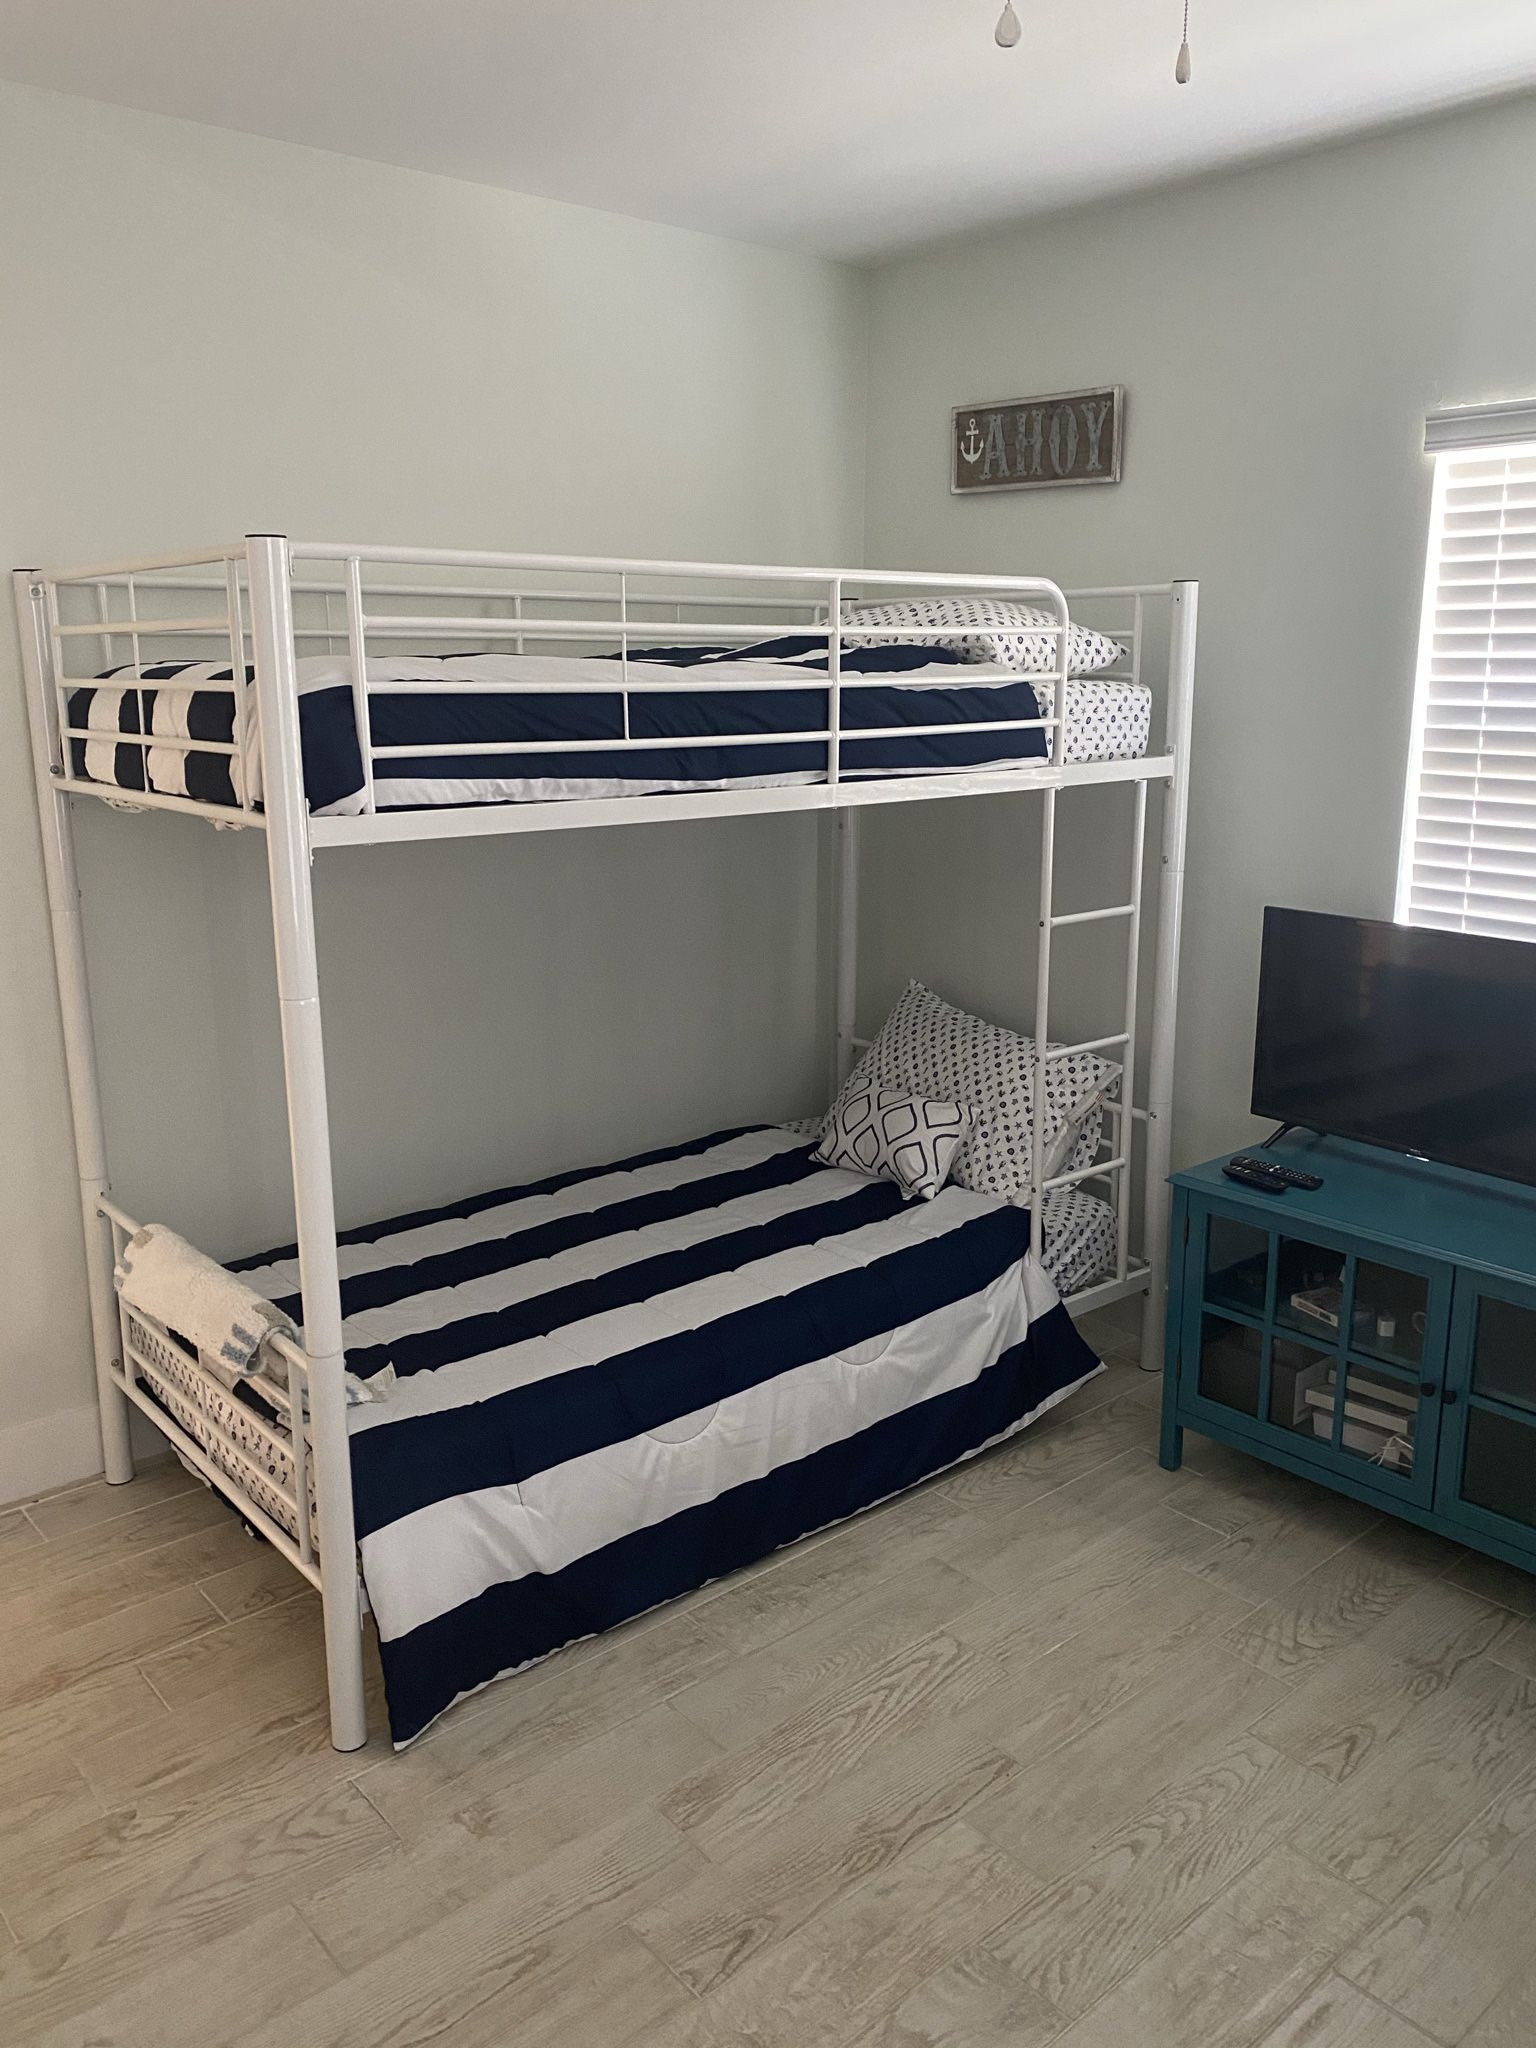 Brand New Bunk Beds And Bedding .